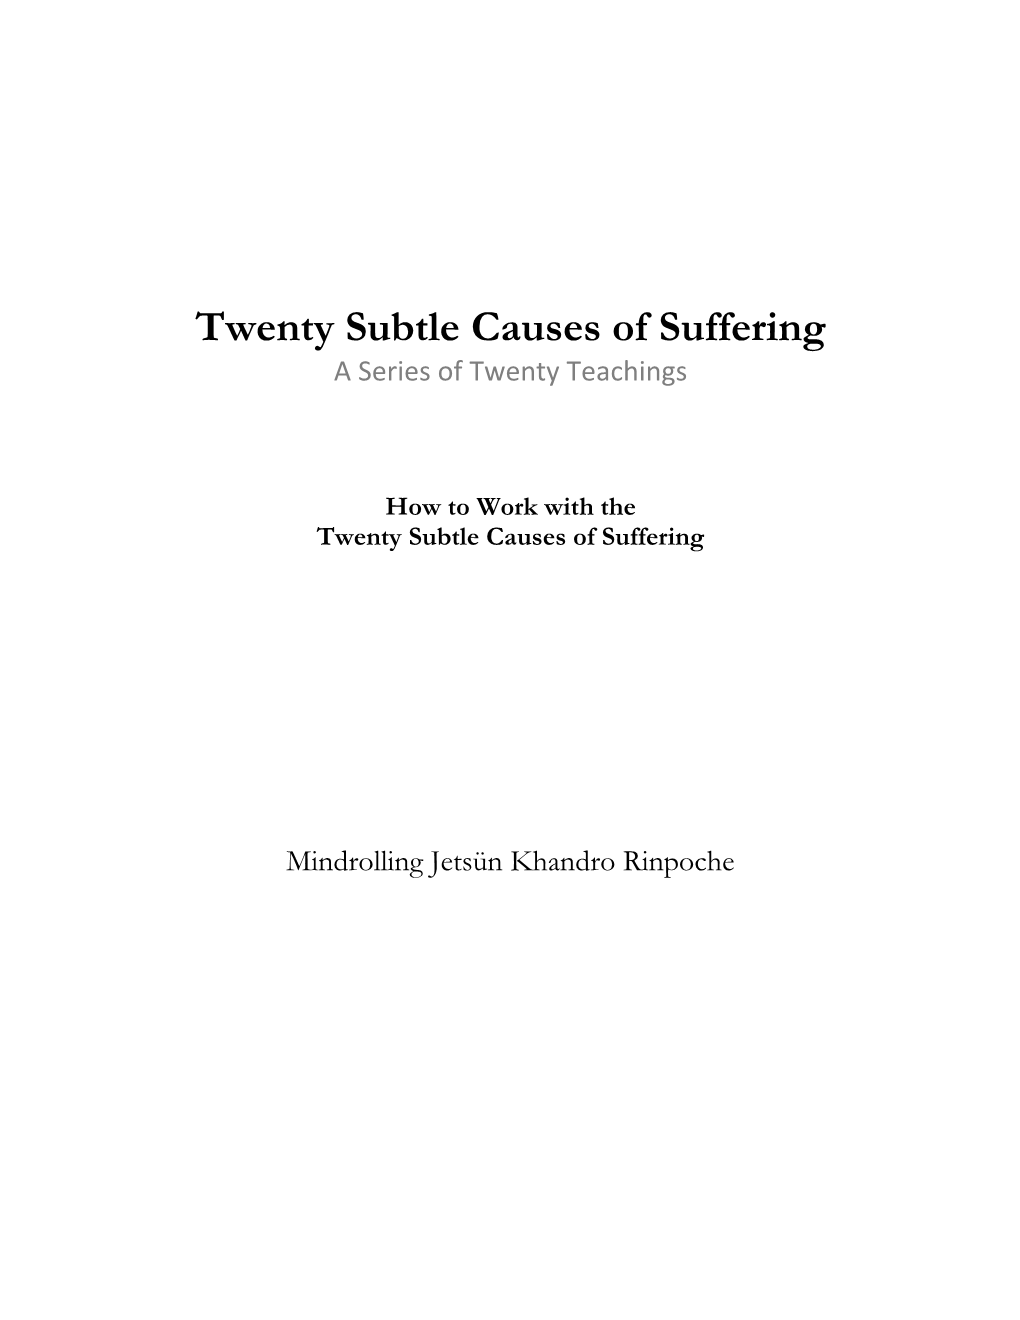 How to Work with the Twenty Subtle Causes of Suffering